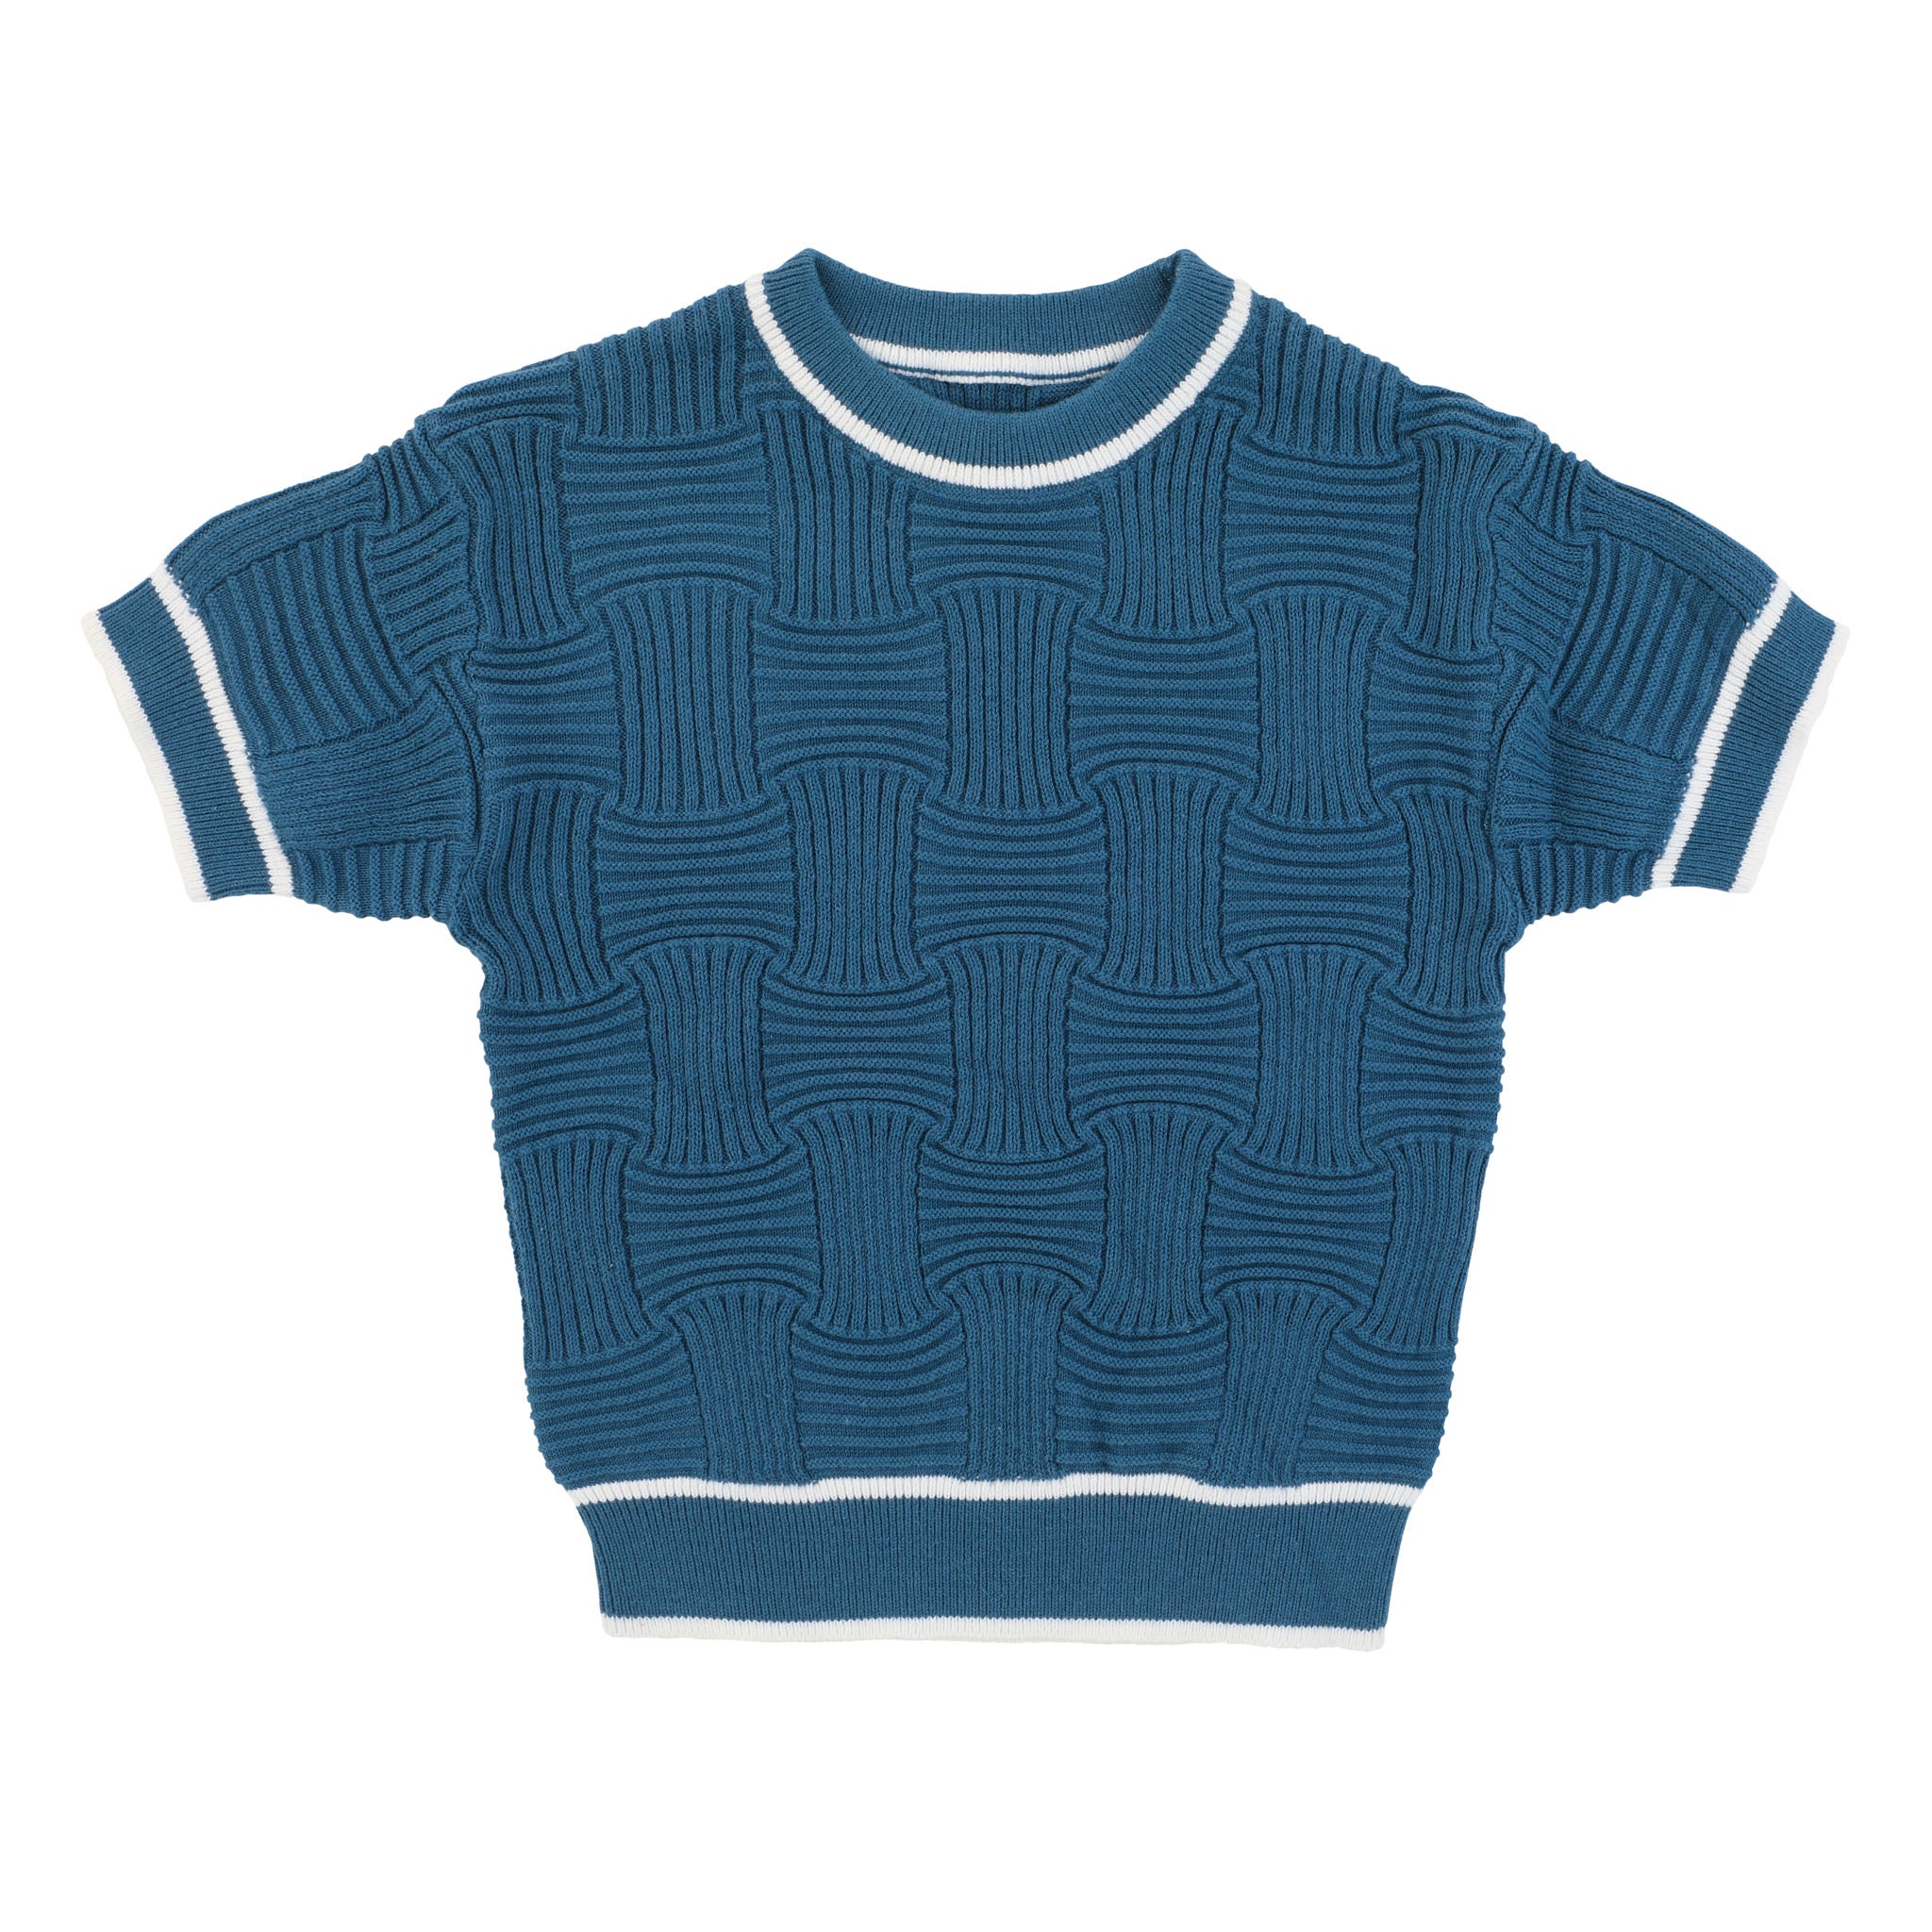 Blue Knit Square Weaved Short Sleeve Sweater